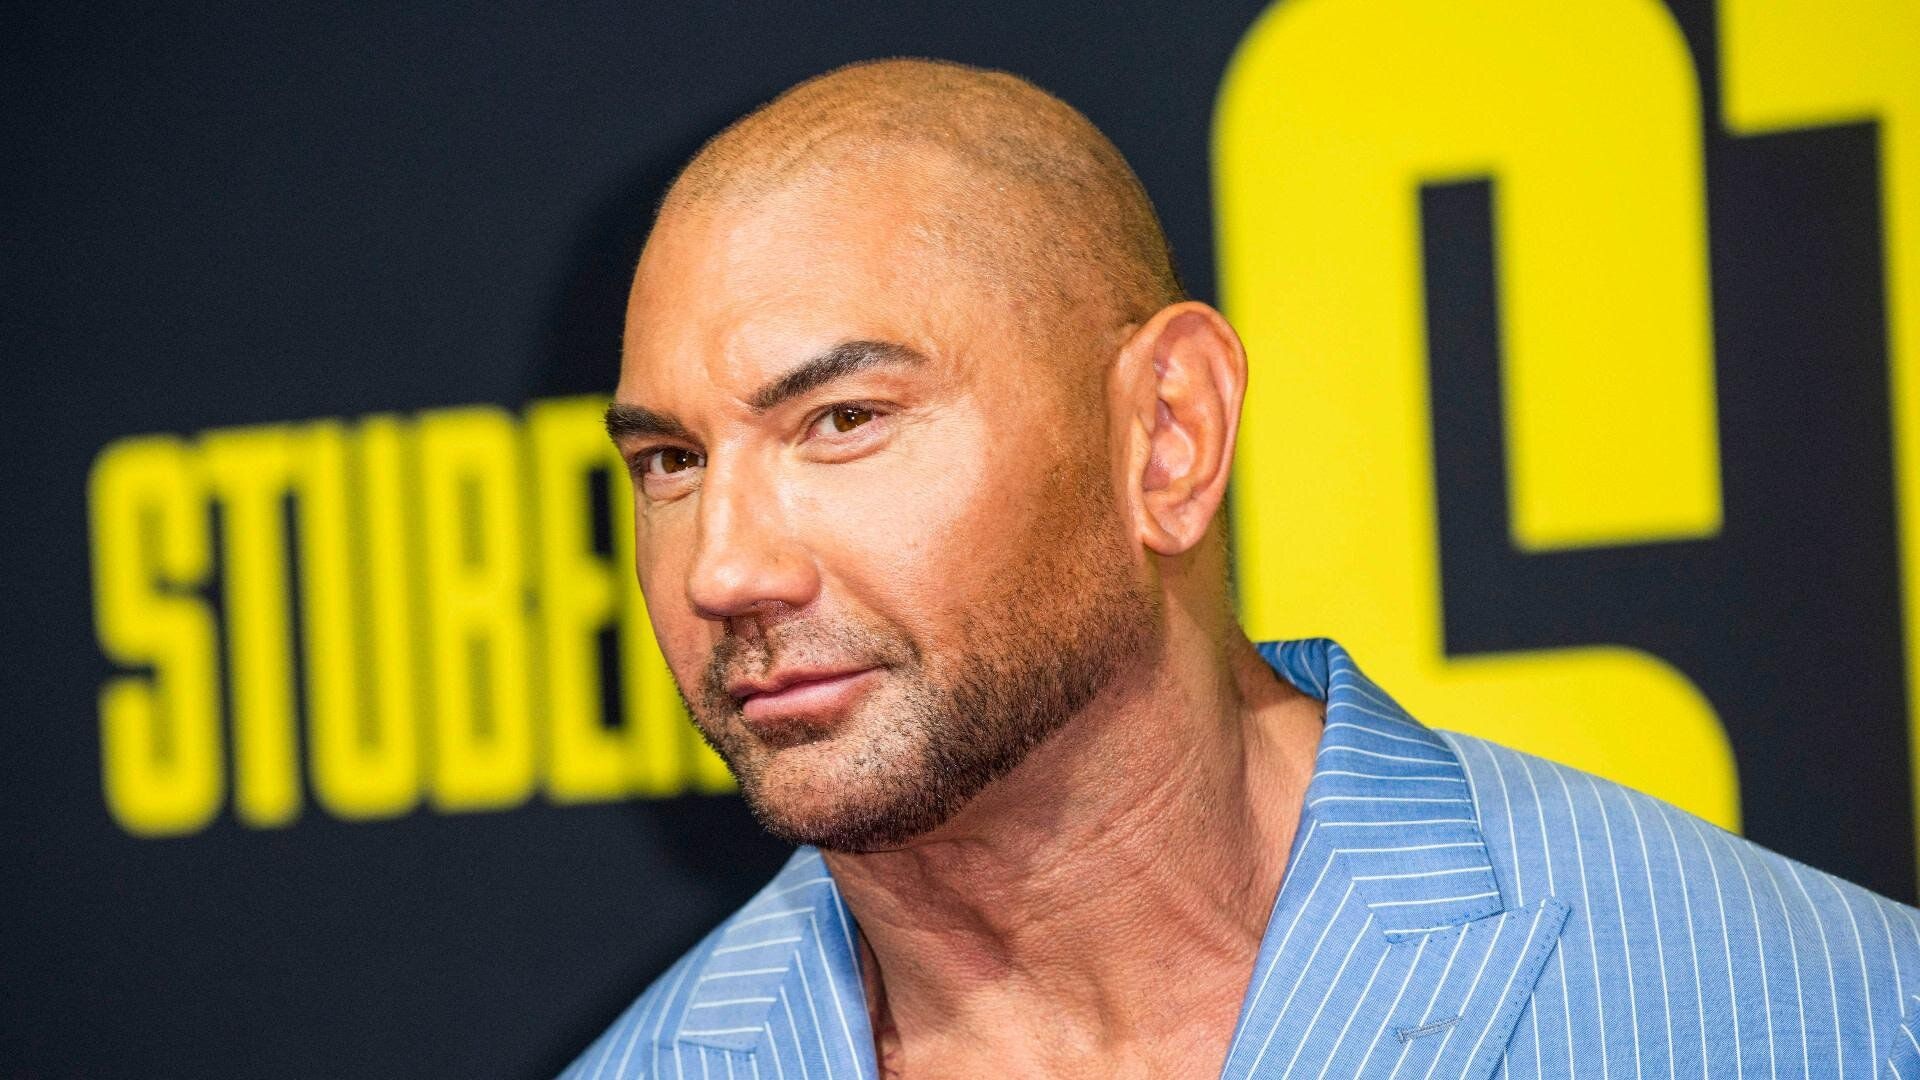 Knives Out 2: Dave Bautista as Duke Cody, a video game streamer and men's rights activist. 1920x1080 Full HD Background.